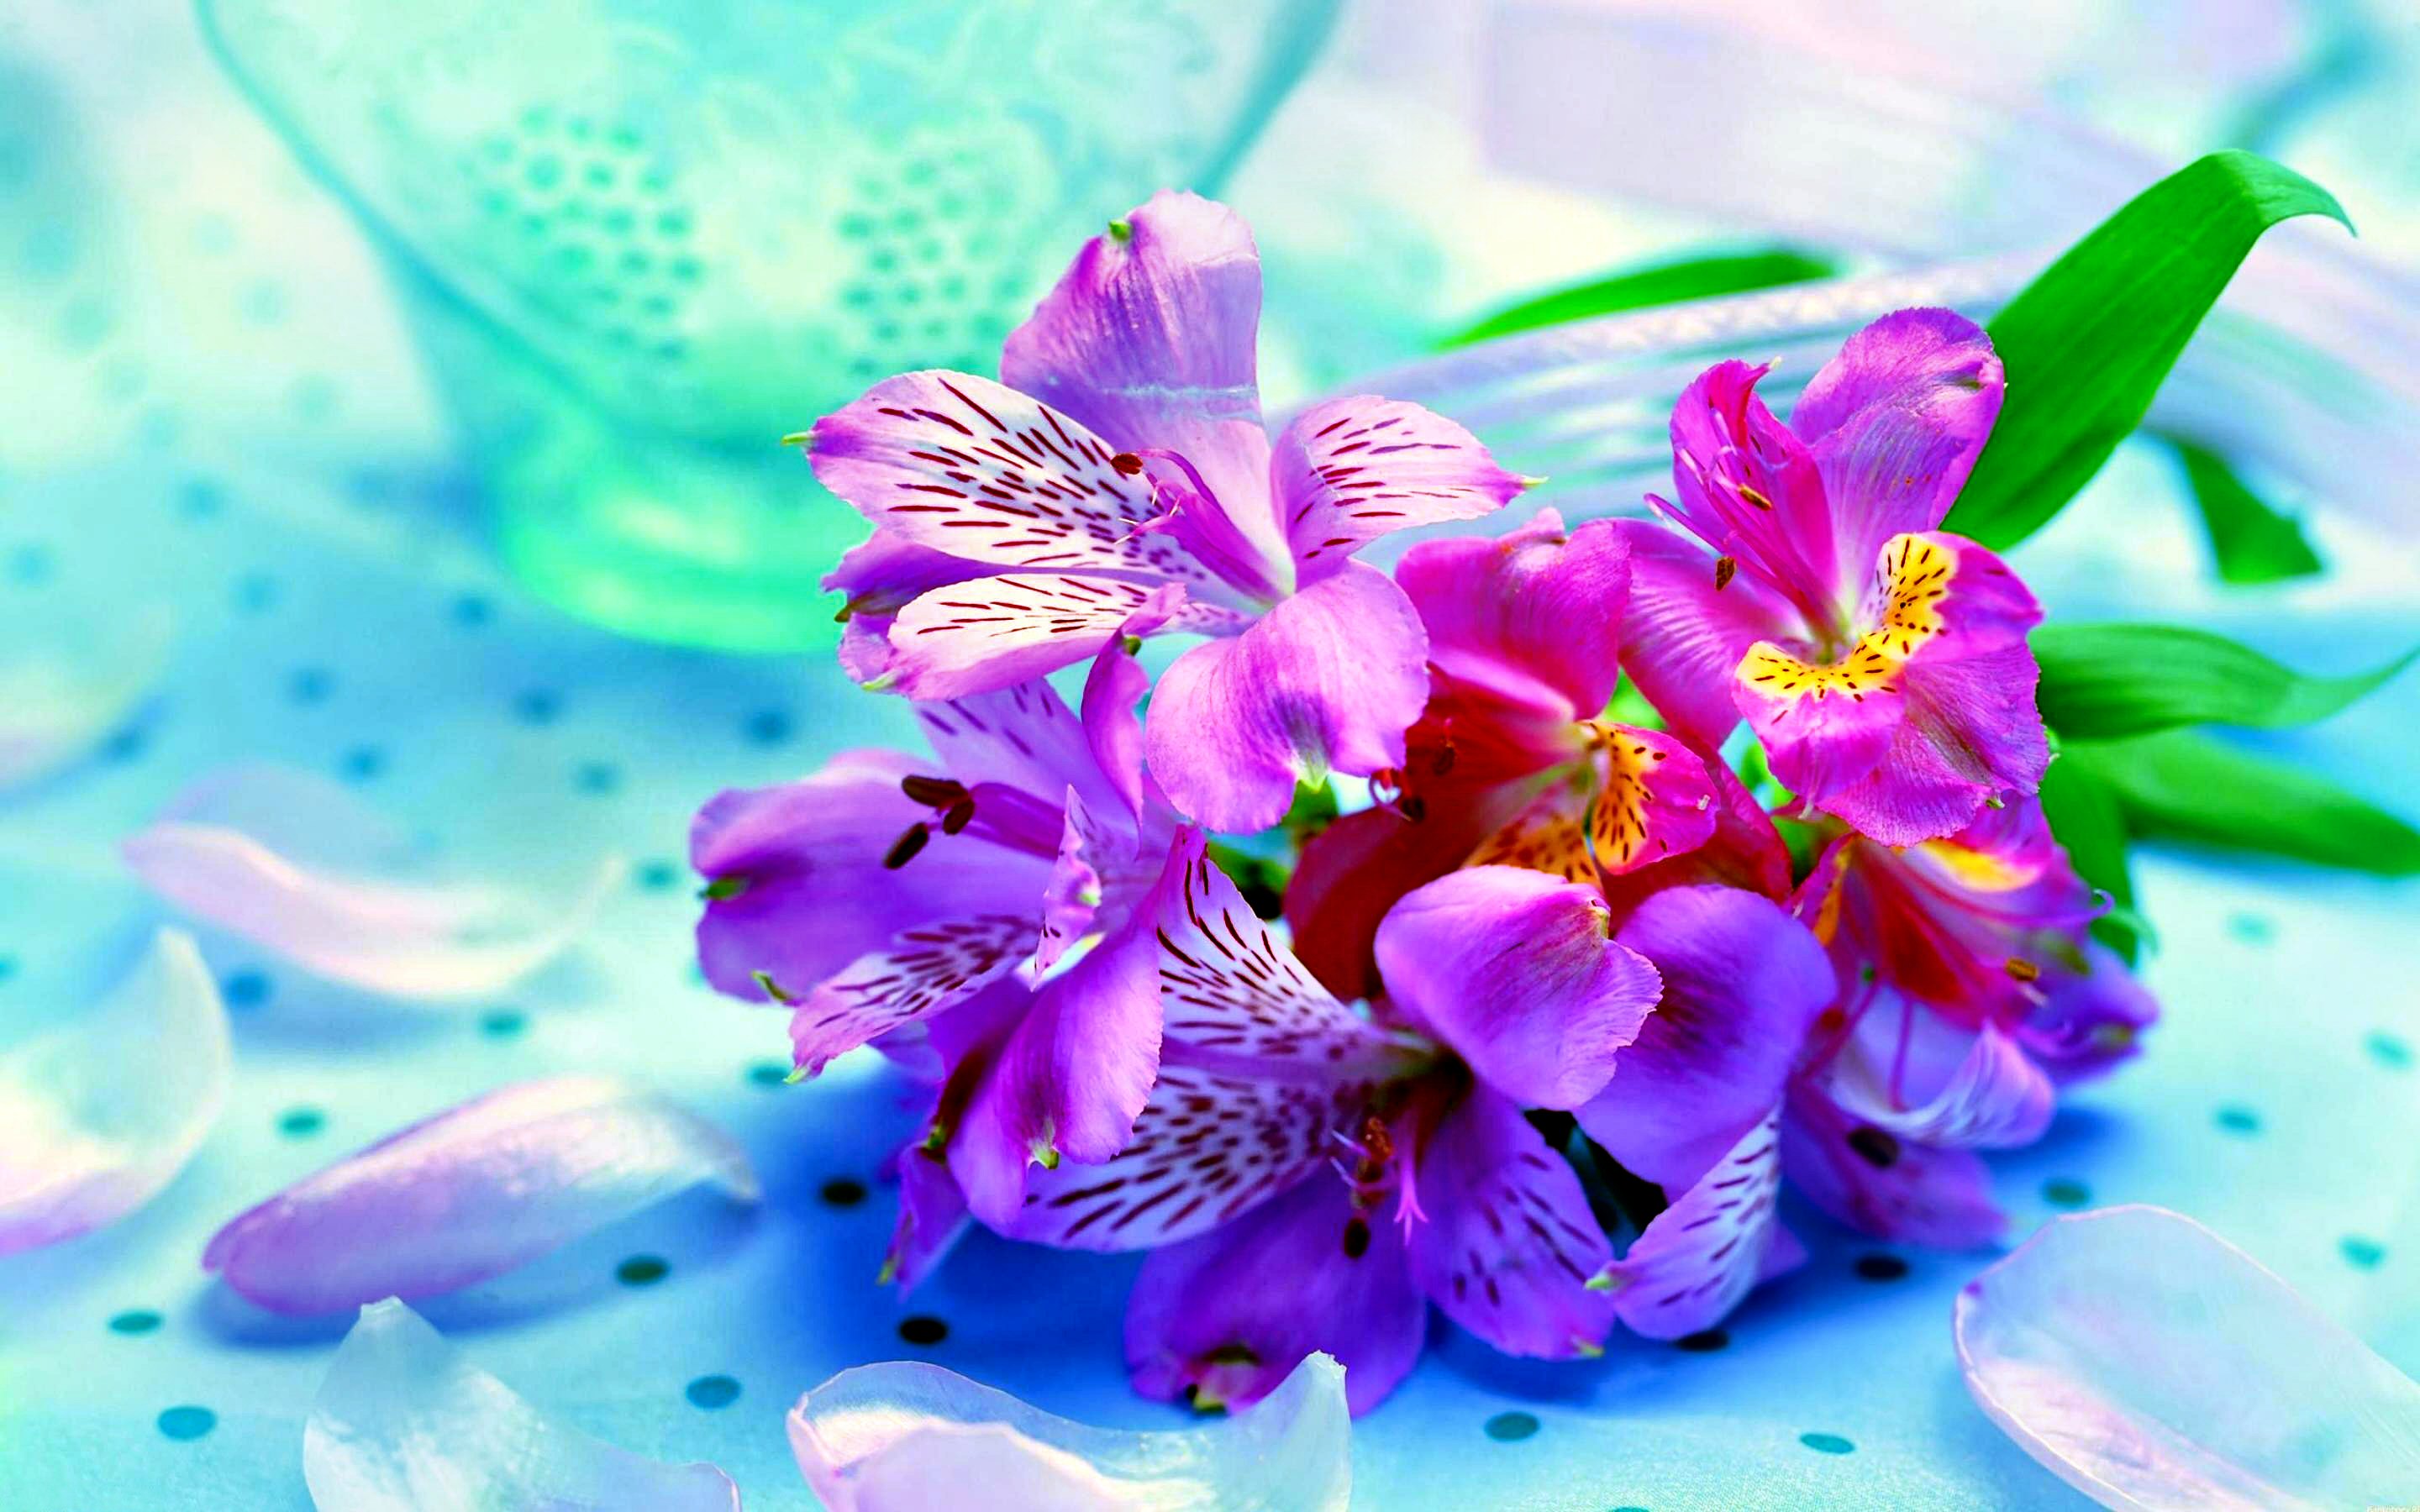 15 Outstanding high resolution desktop wallpaper flowers You Can Use It ...